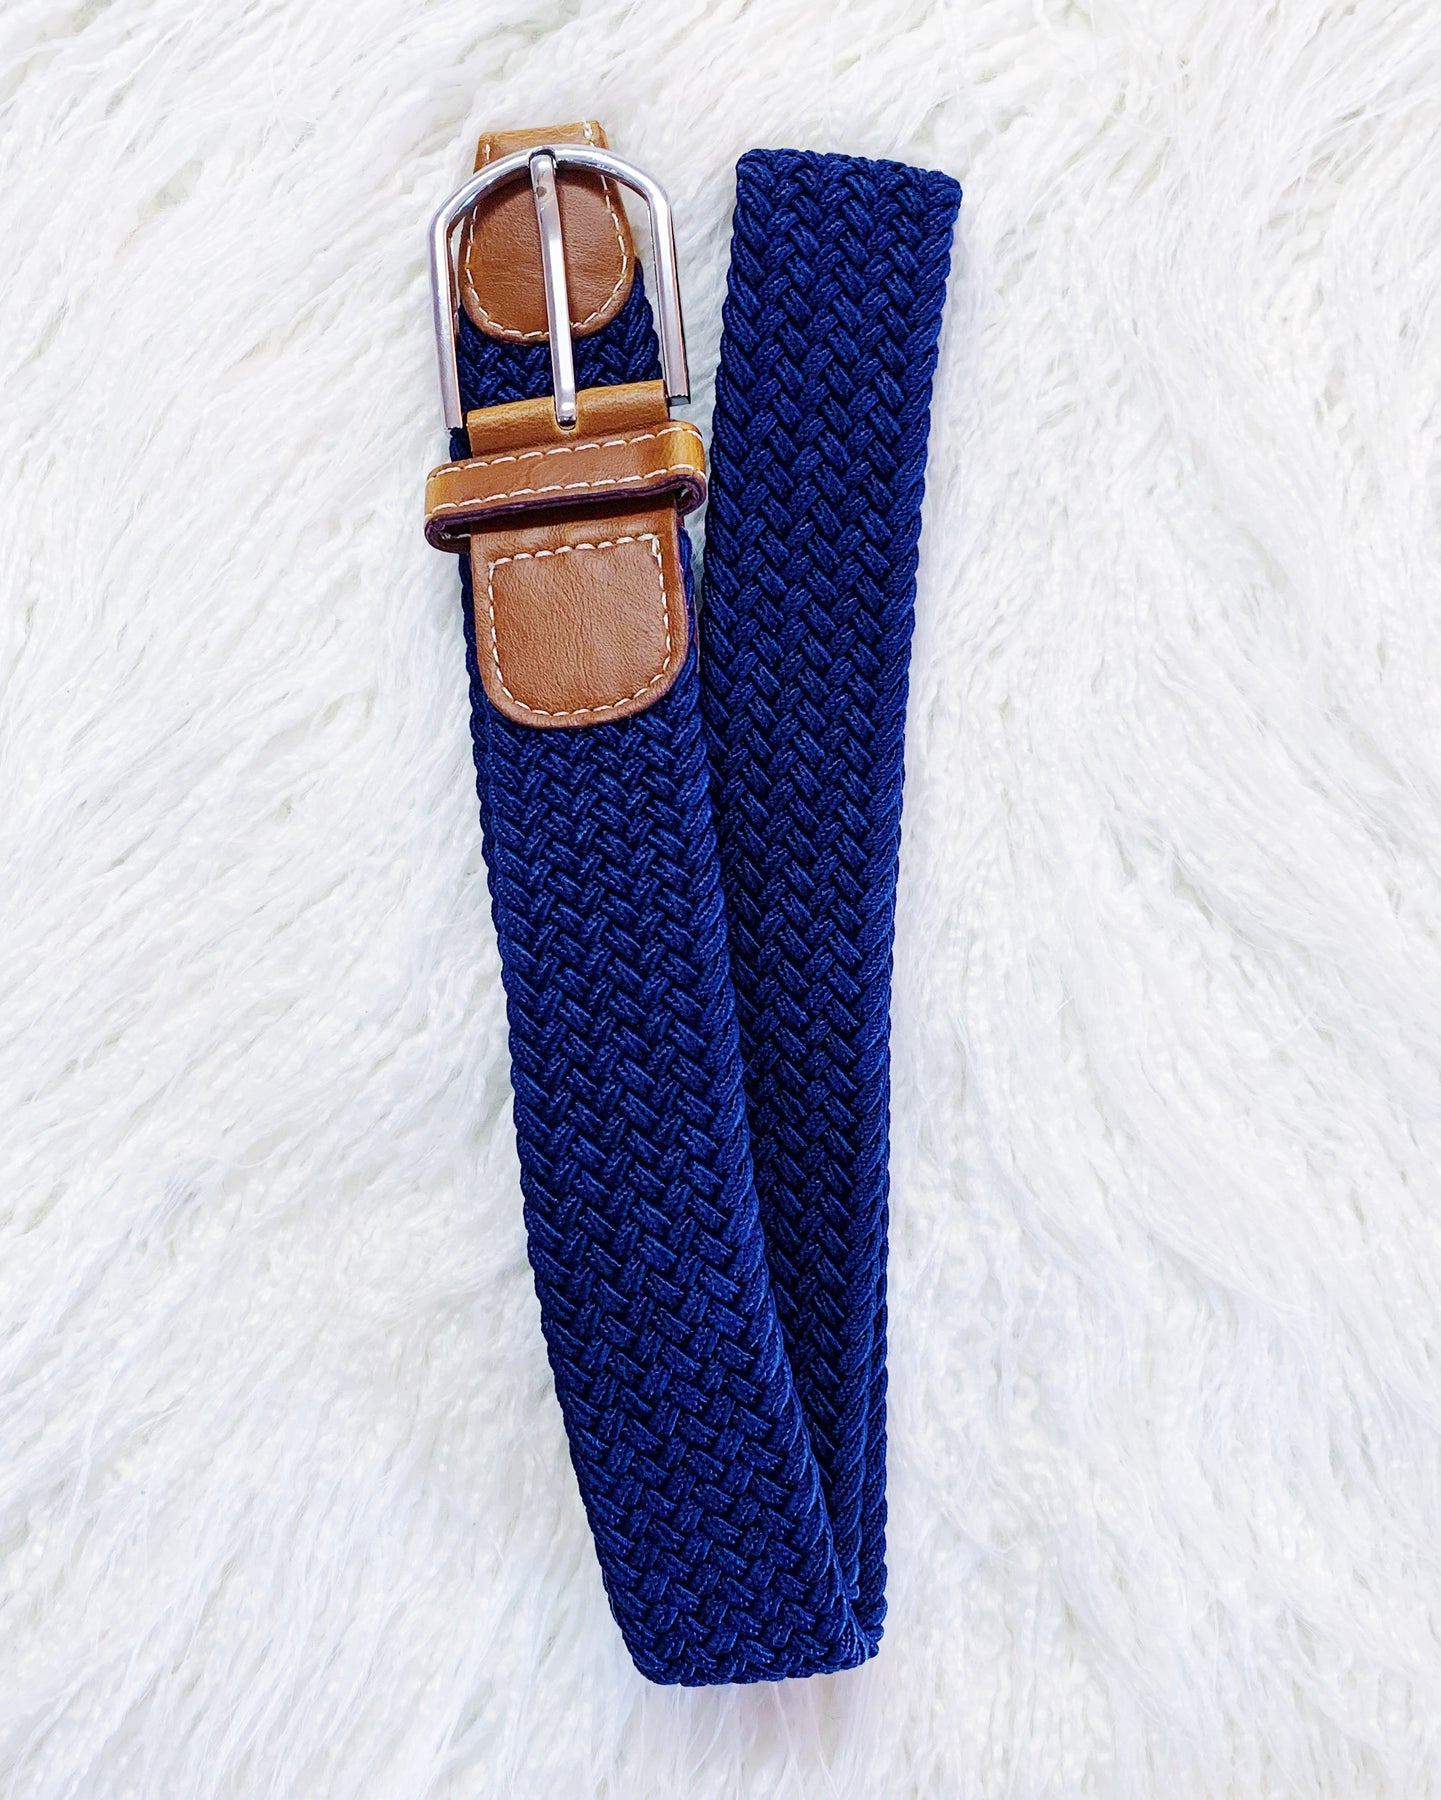 Urban Horsewear Riders Belts - For Stretch